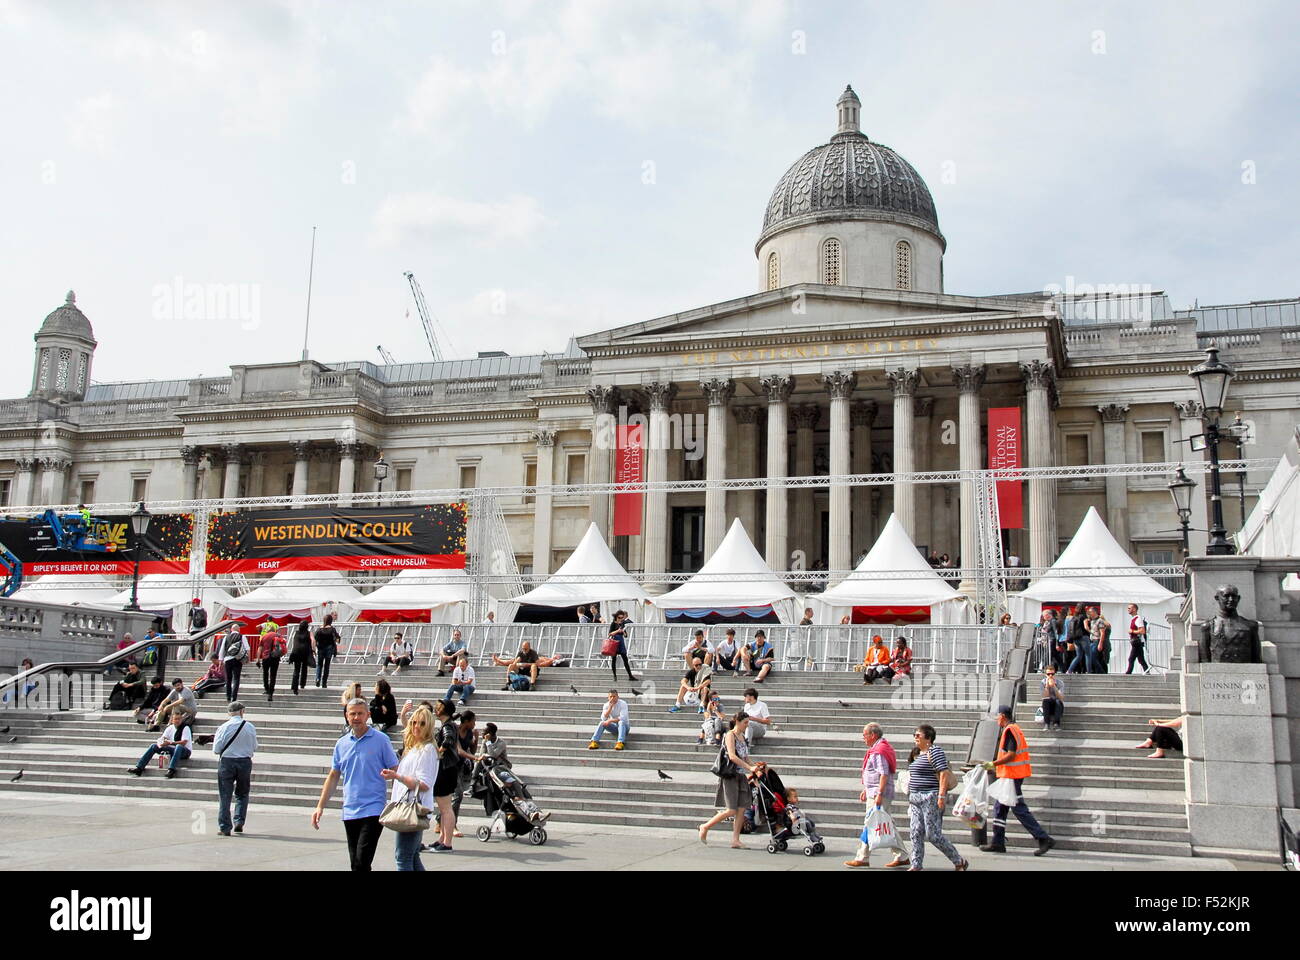 Trafalgar Square with the National Gallery on one side in London, England, UK Stock Photo